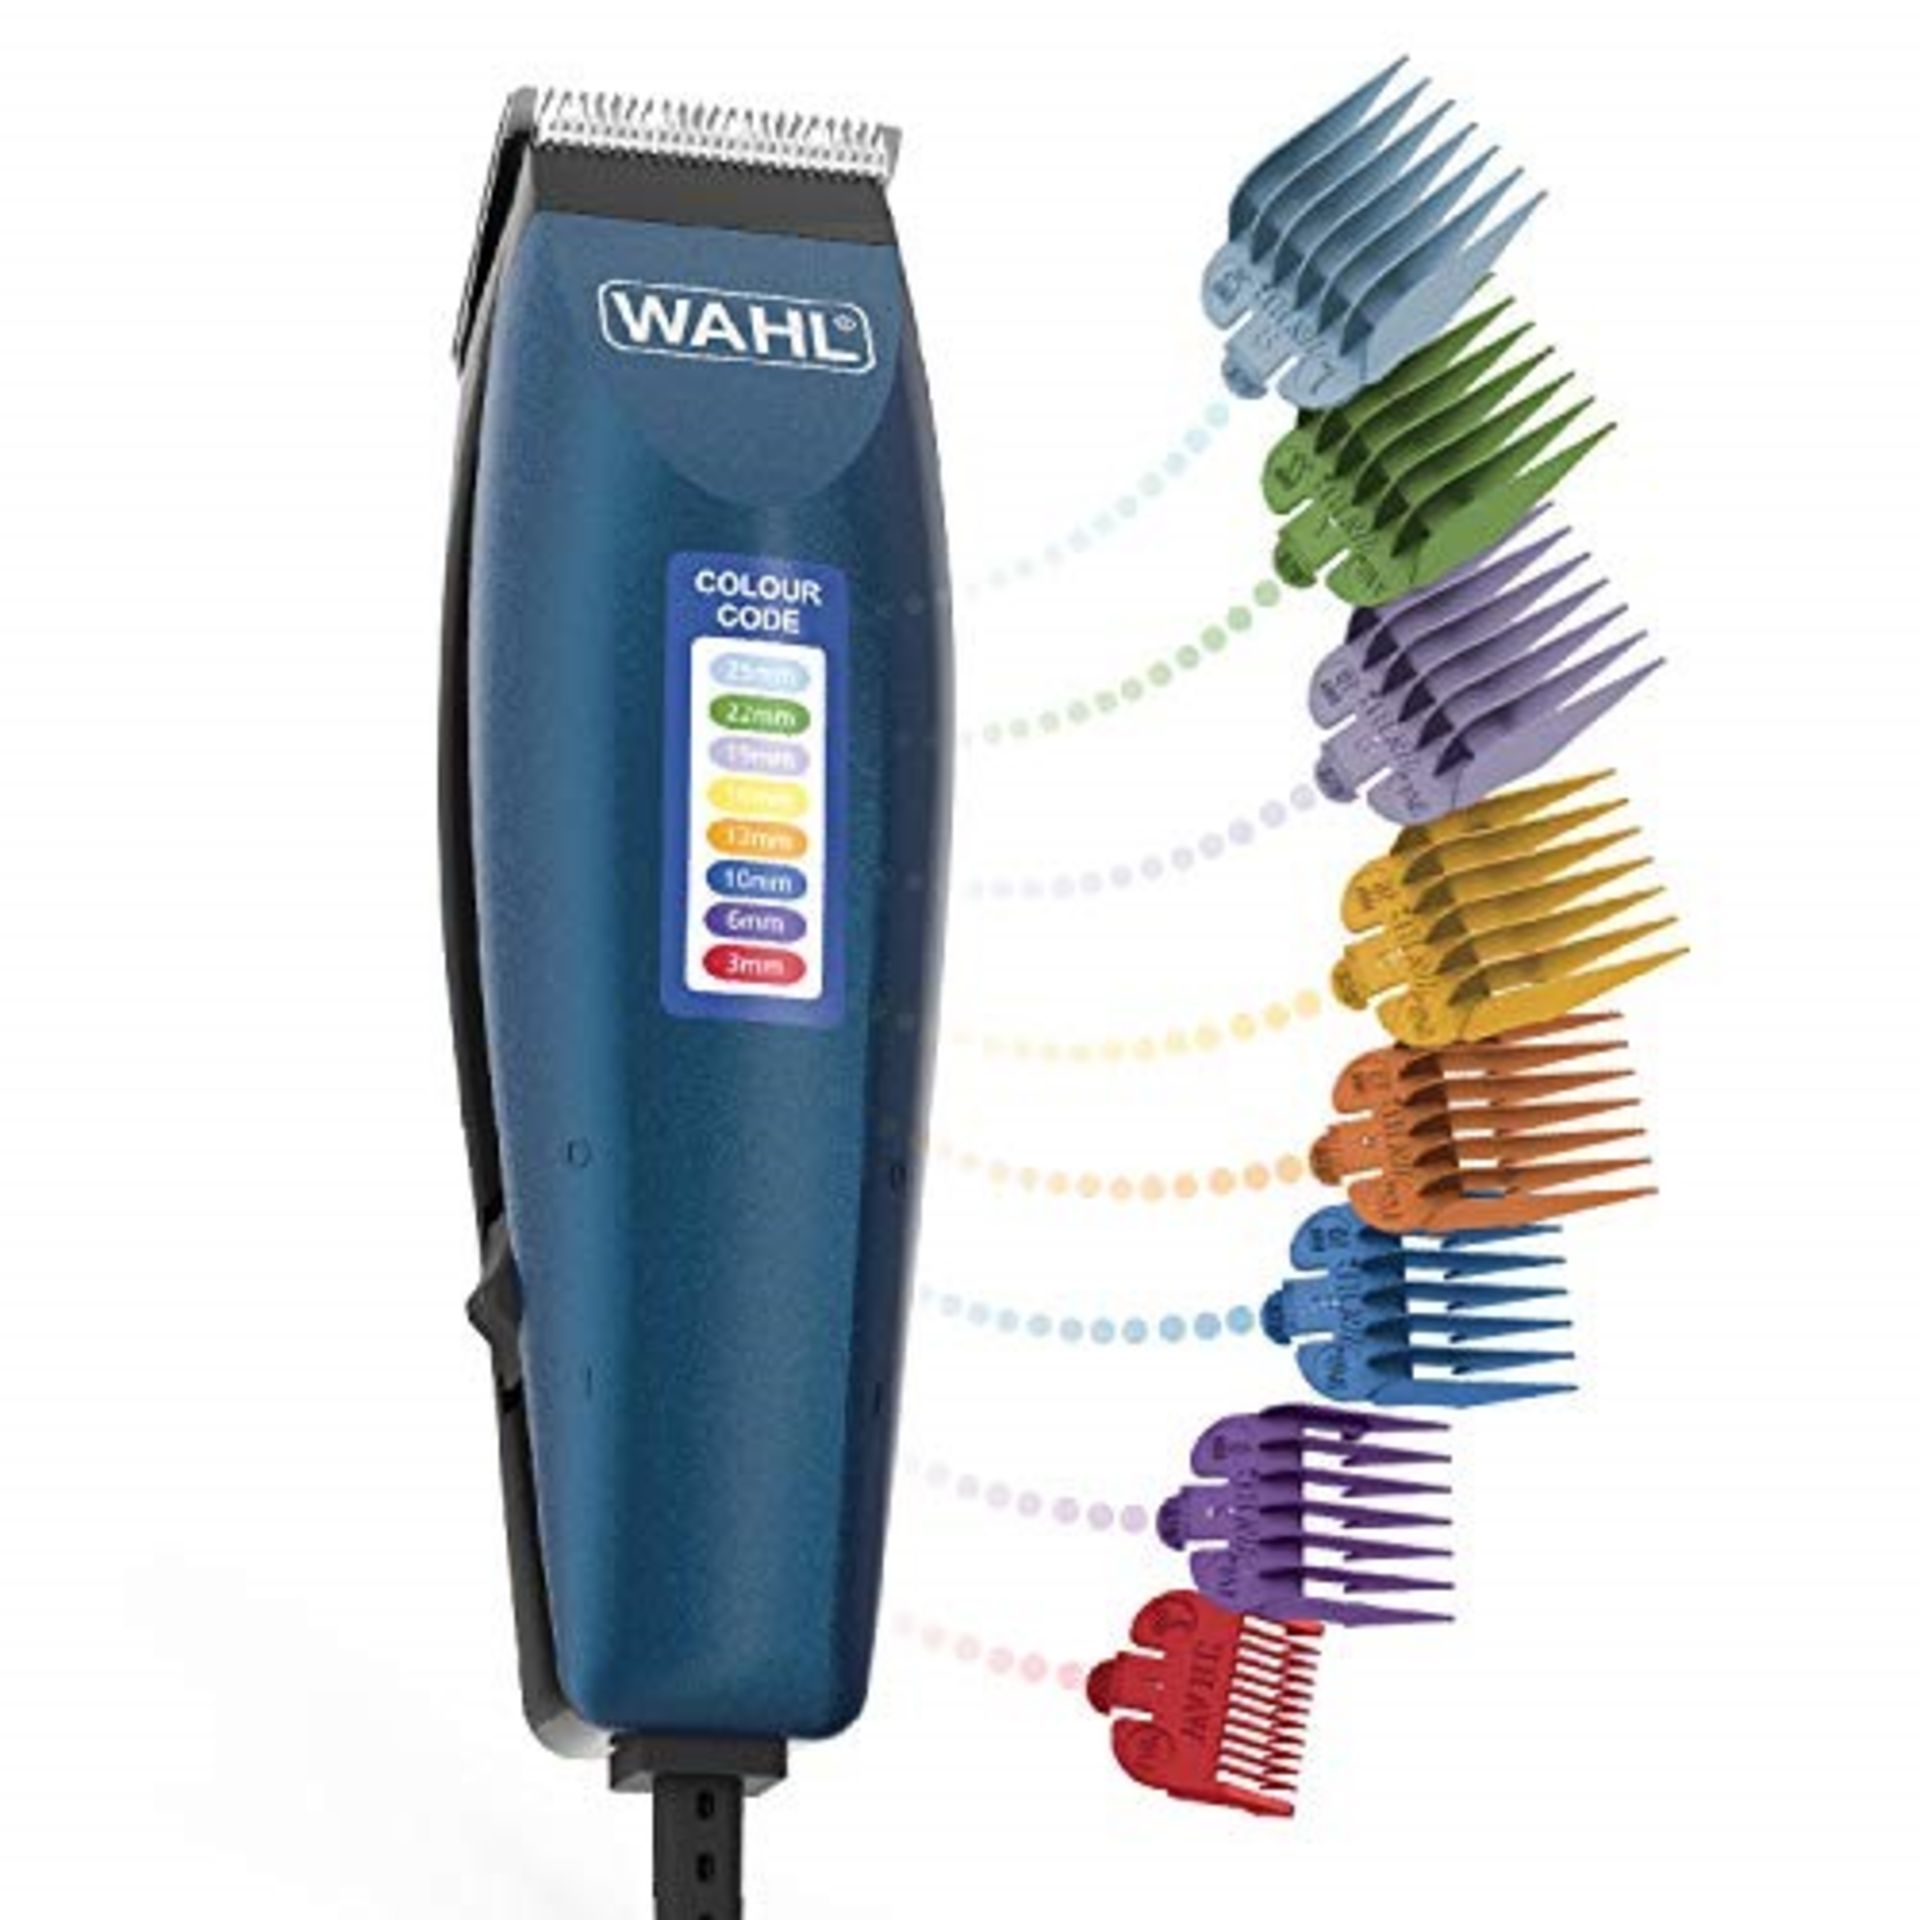 COMBINED RRP £118.00 LOT TO CONTAIN 8 ASSORTED Personal Care Appliances: GroomEase, Wahl, Wahl, - Image 5 of 9